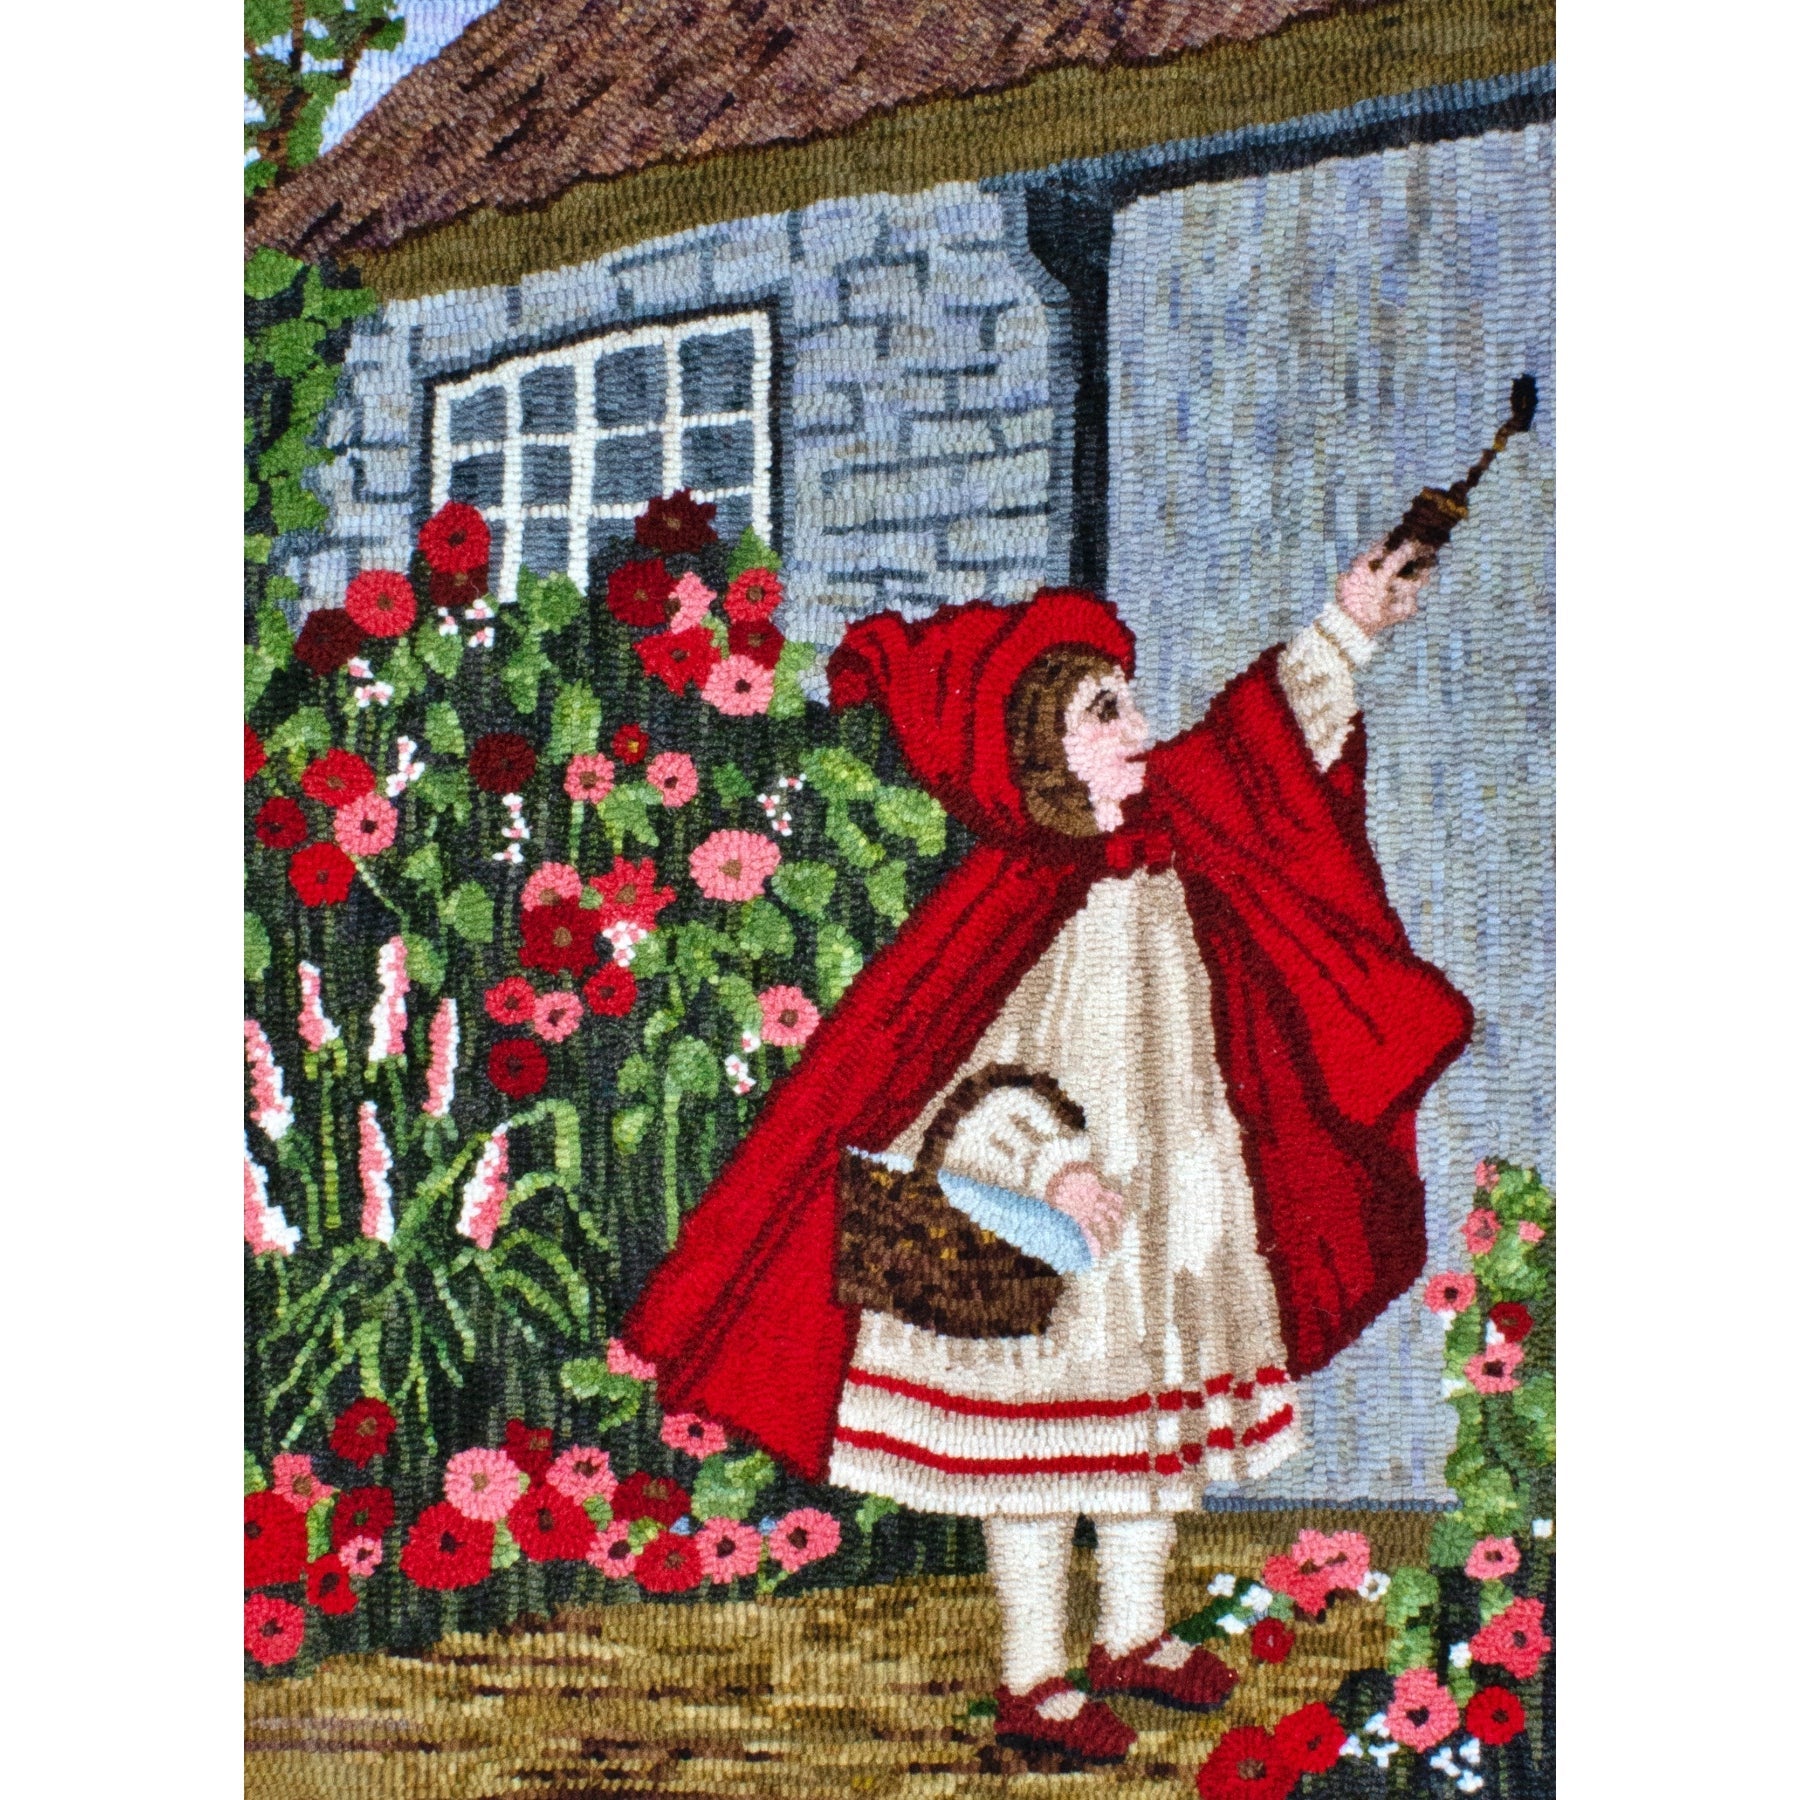 Red Riding Hood, ill. Otto Kubel, 1910, rug hooked by Libbey Lungren